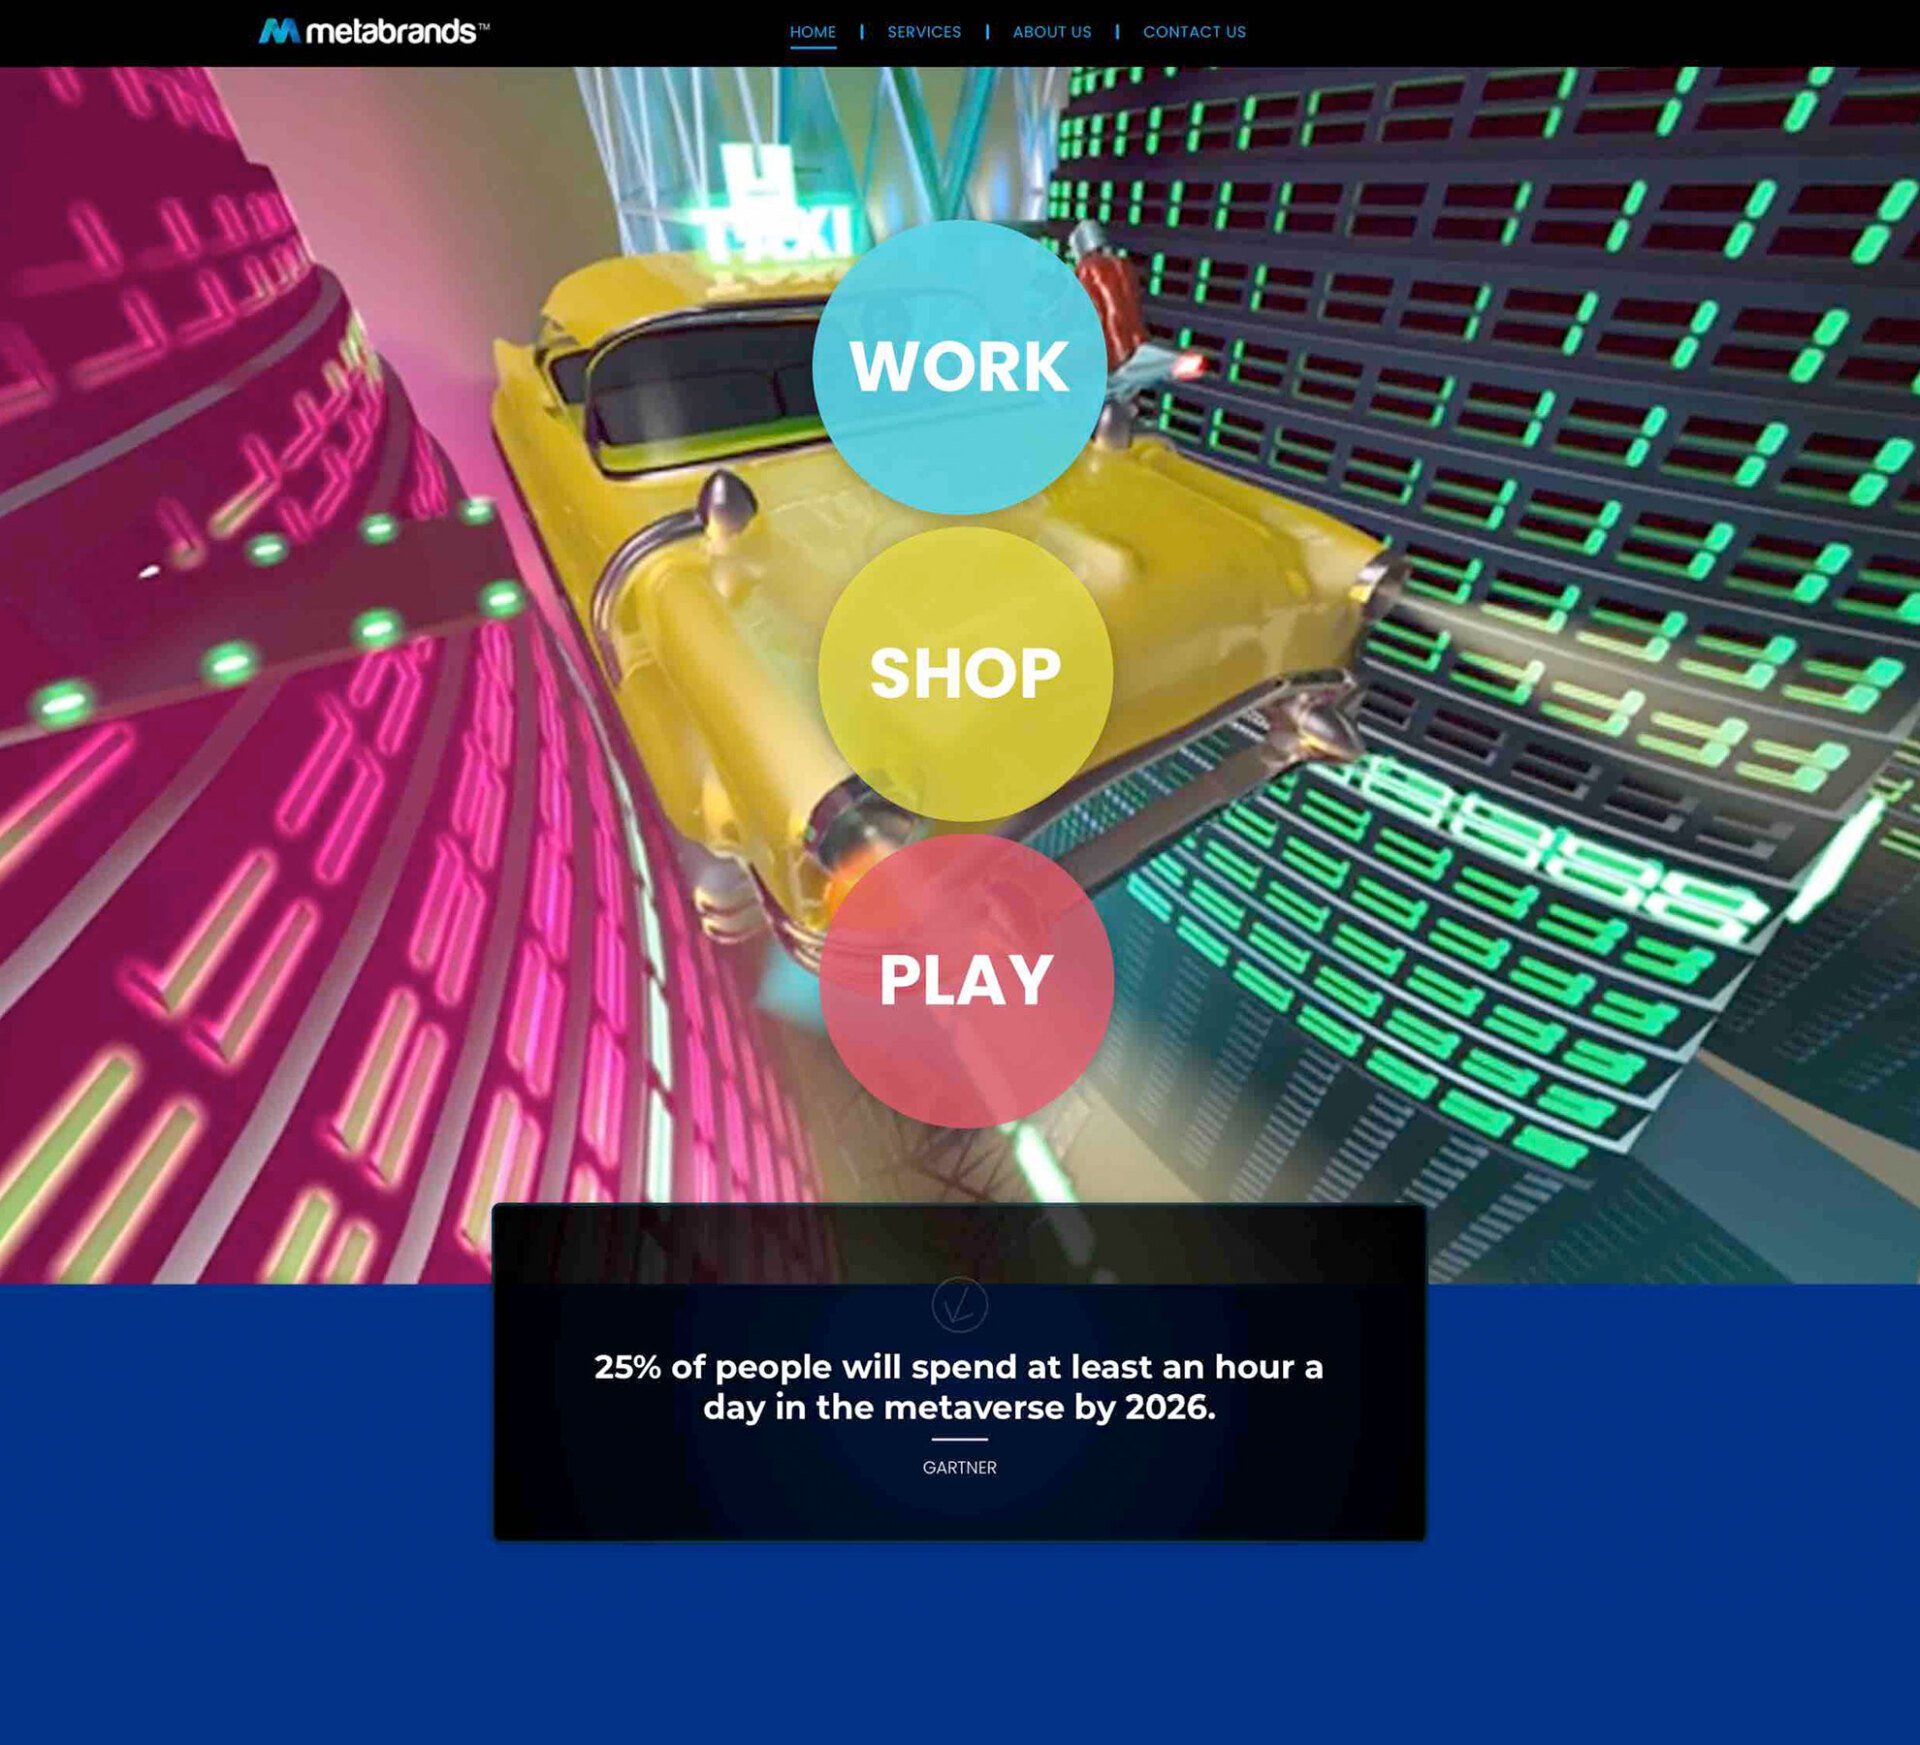 A yellow car is driving through a metaverse city with buttons for work shop and play